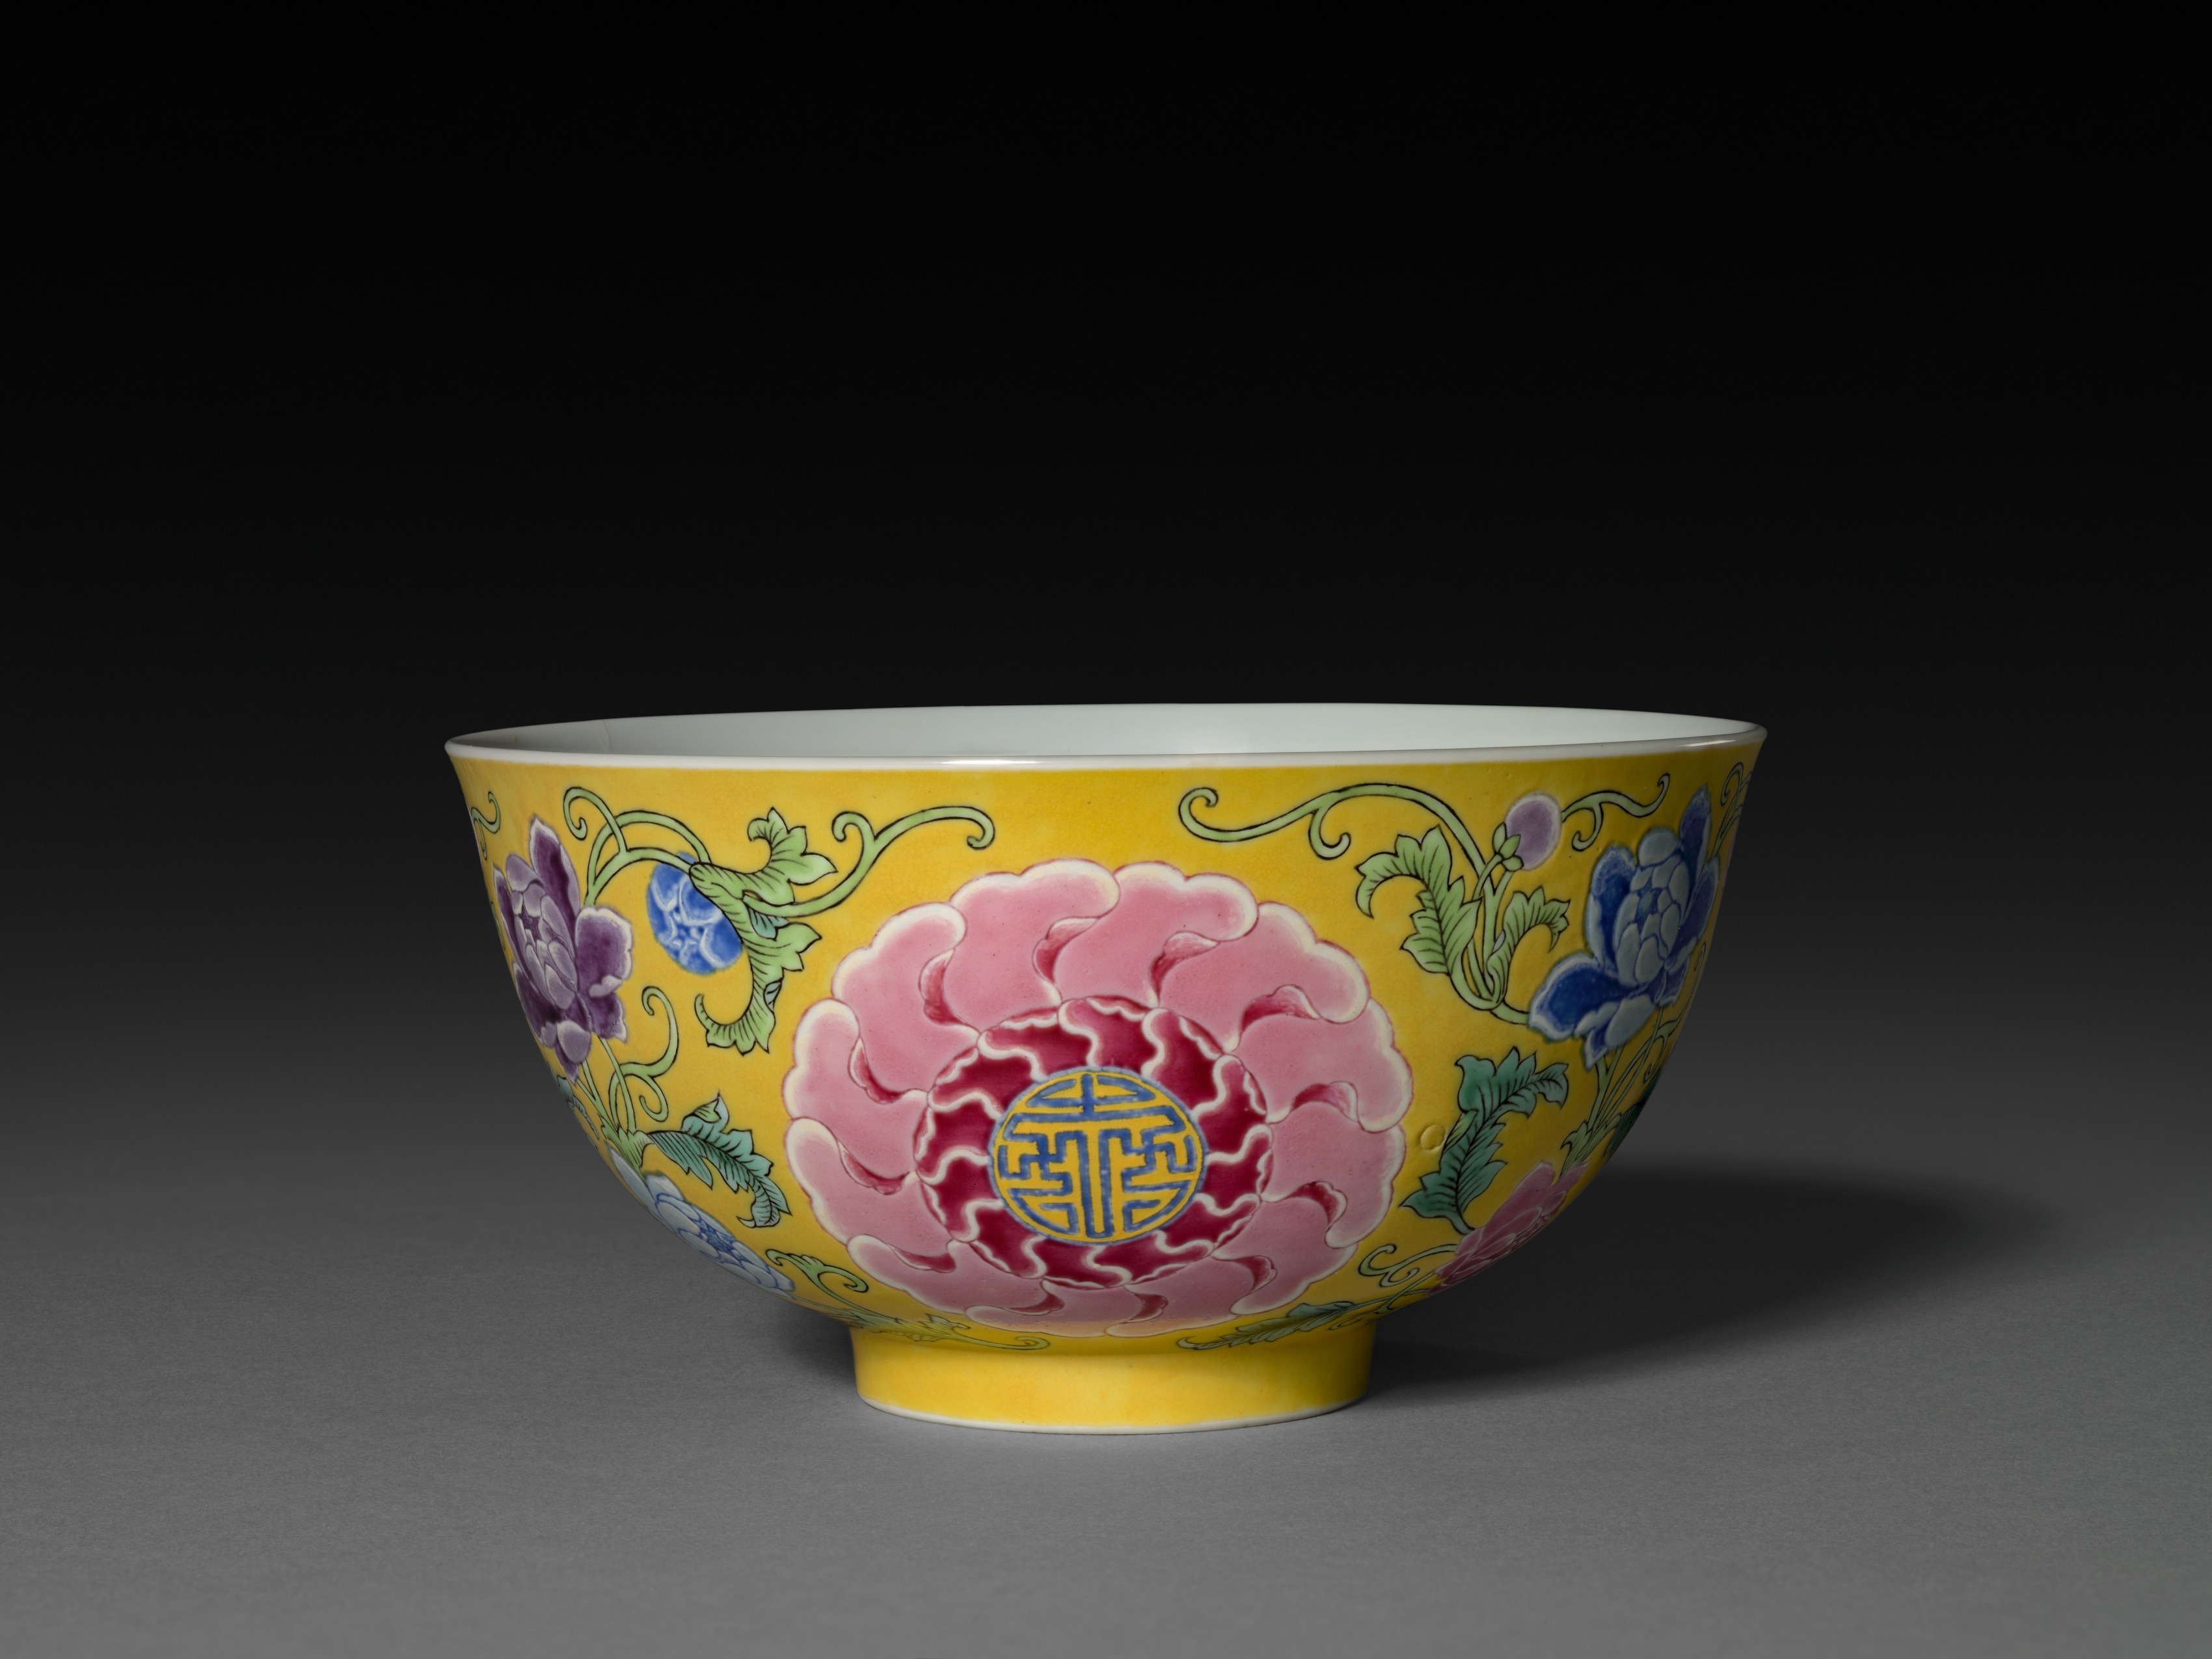 Bowl with Floral Sprays and Inscribed Medallions